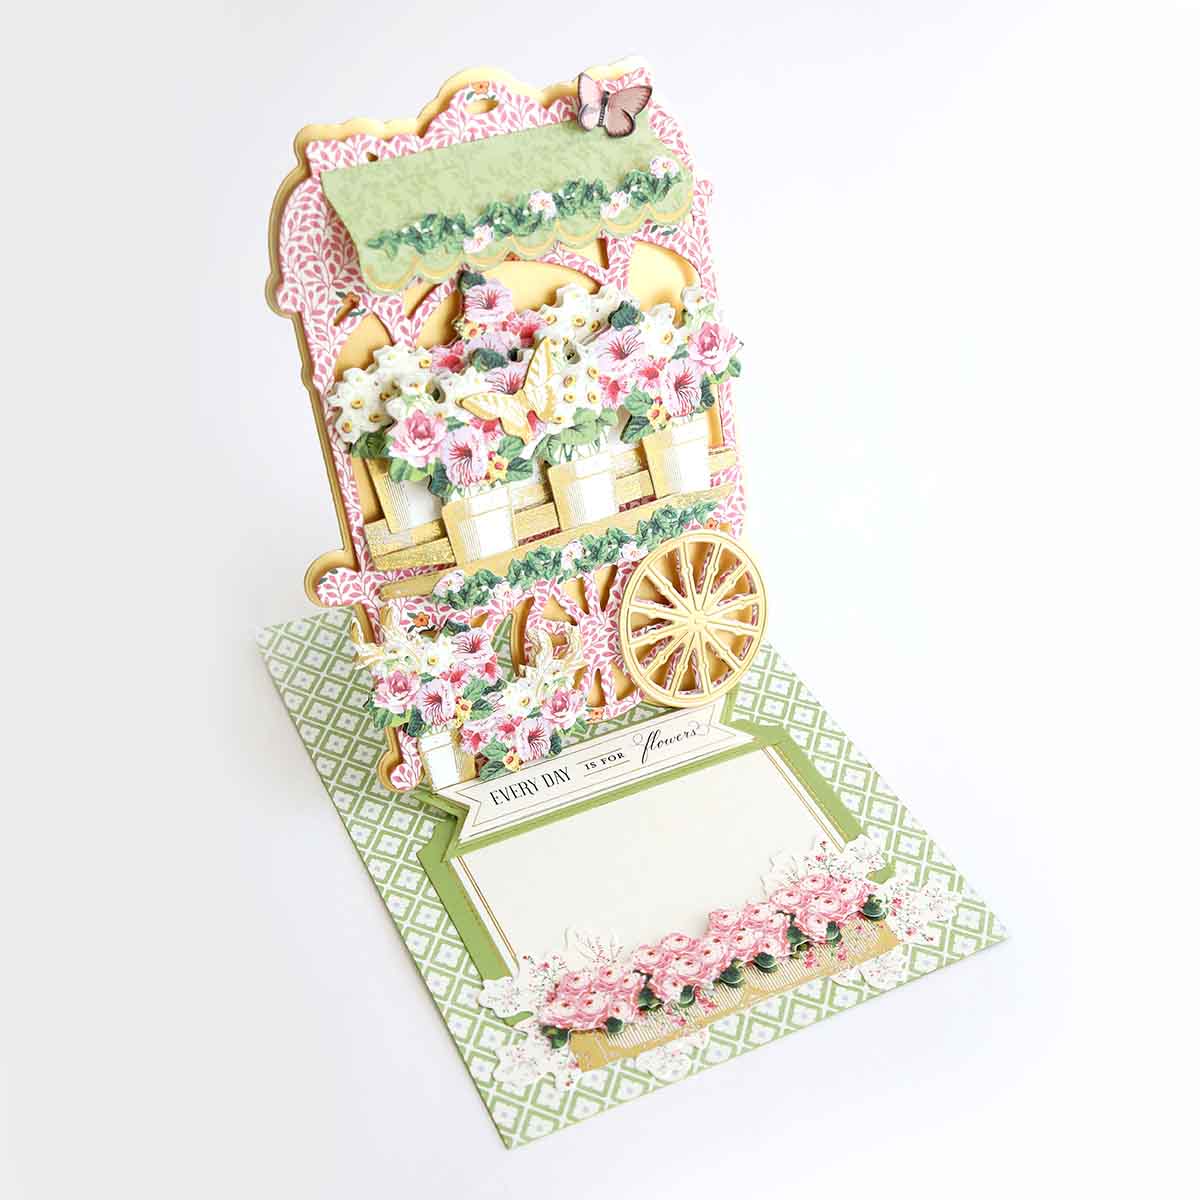 a card with a horse drawn carriage on it.